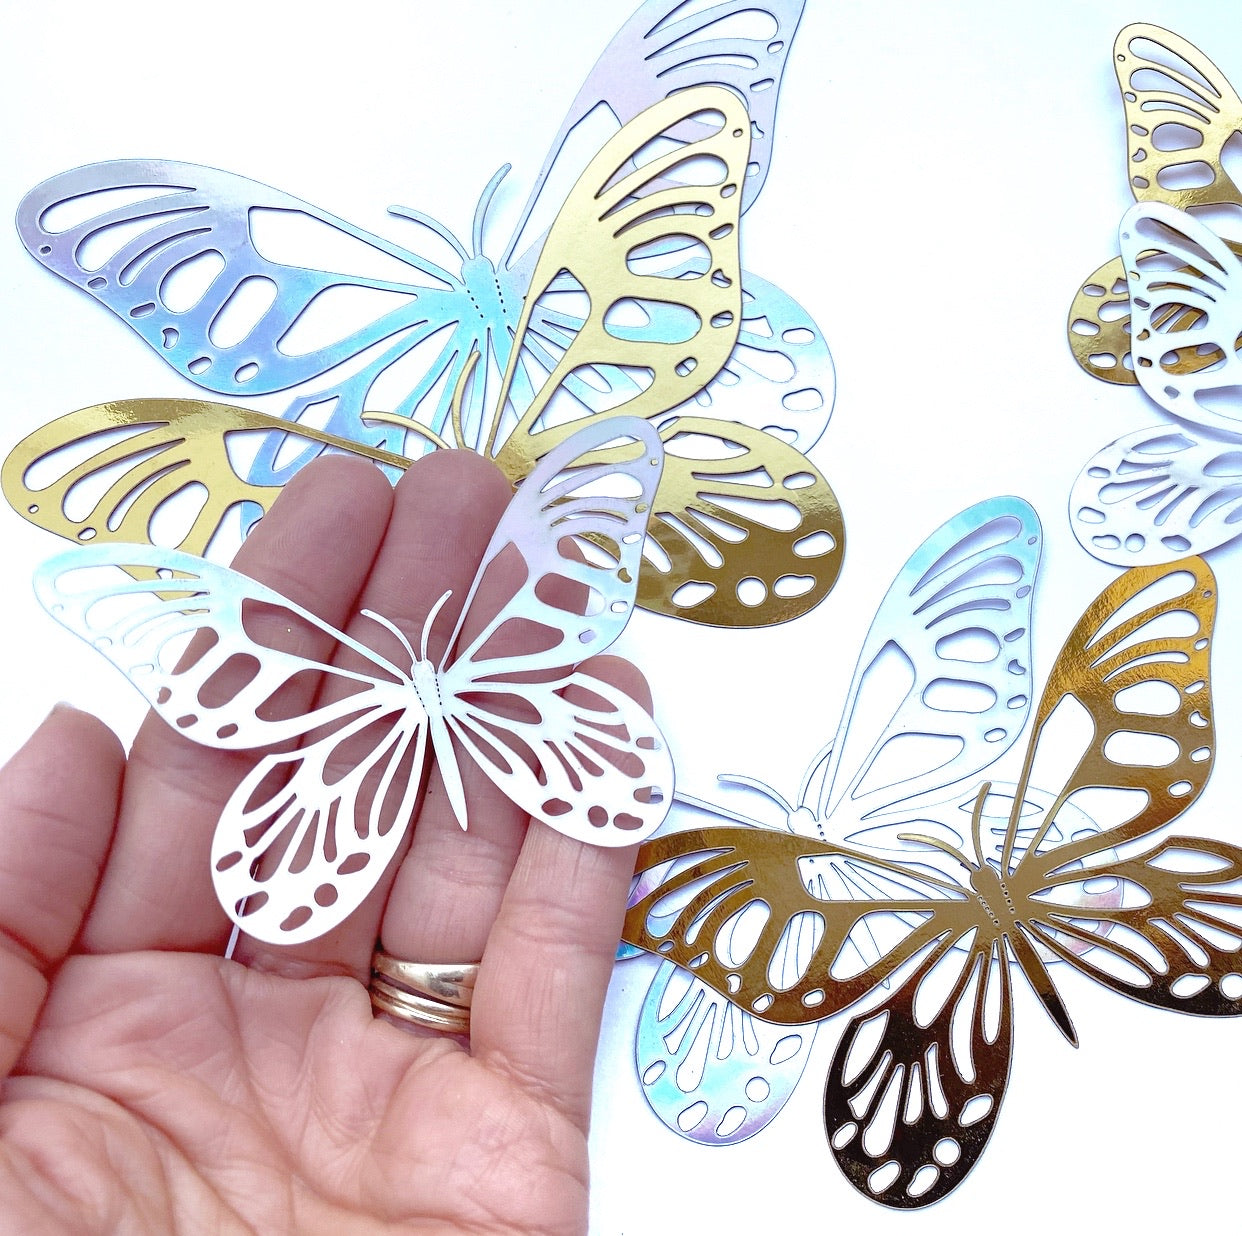 Metallic 3D Cut-out Rounded Butterfly Embellishments